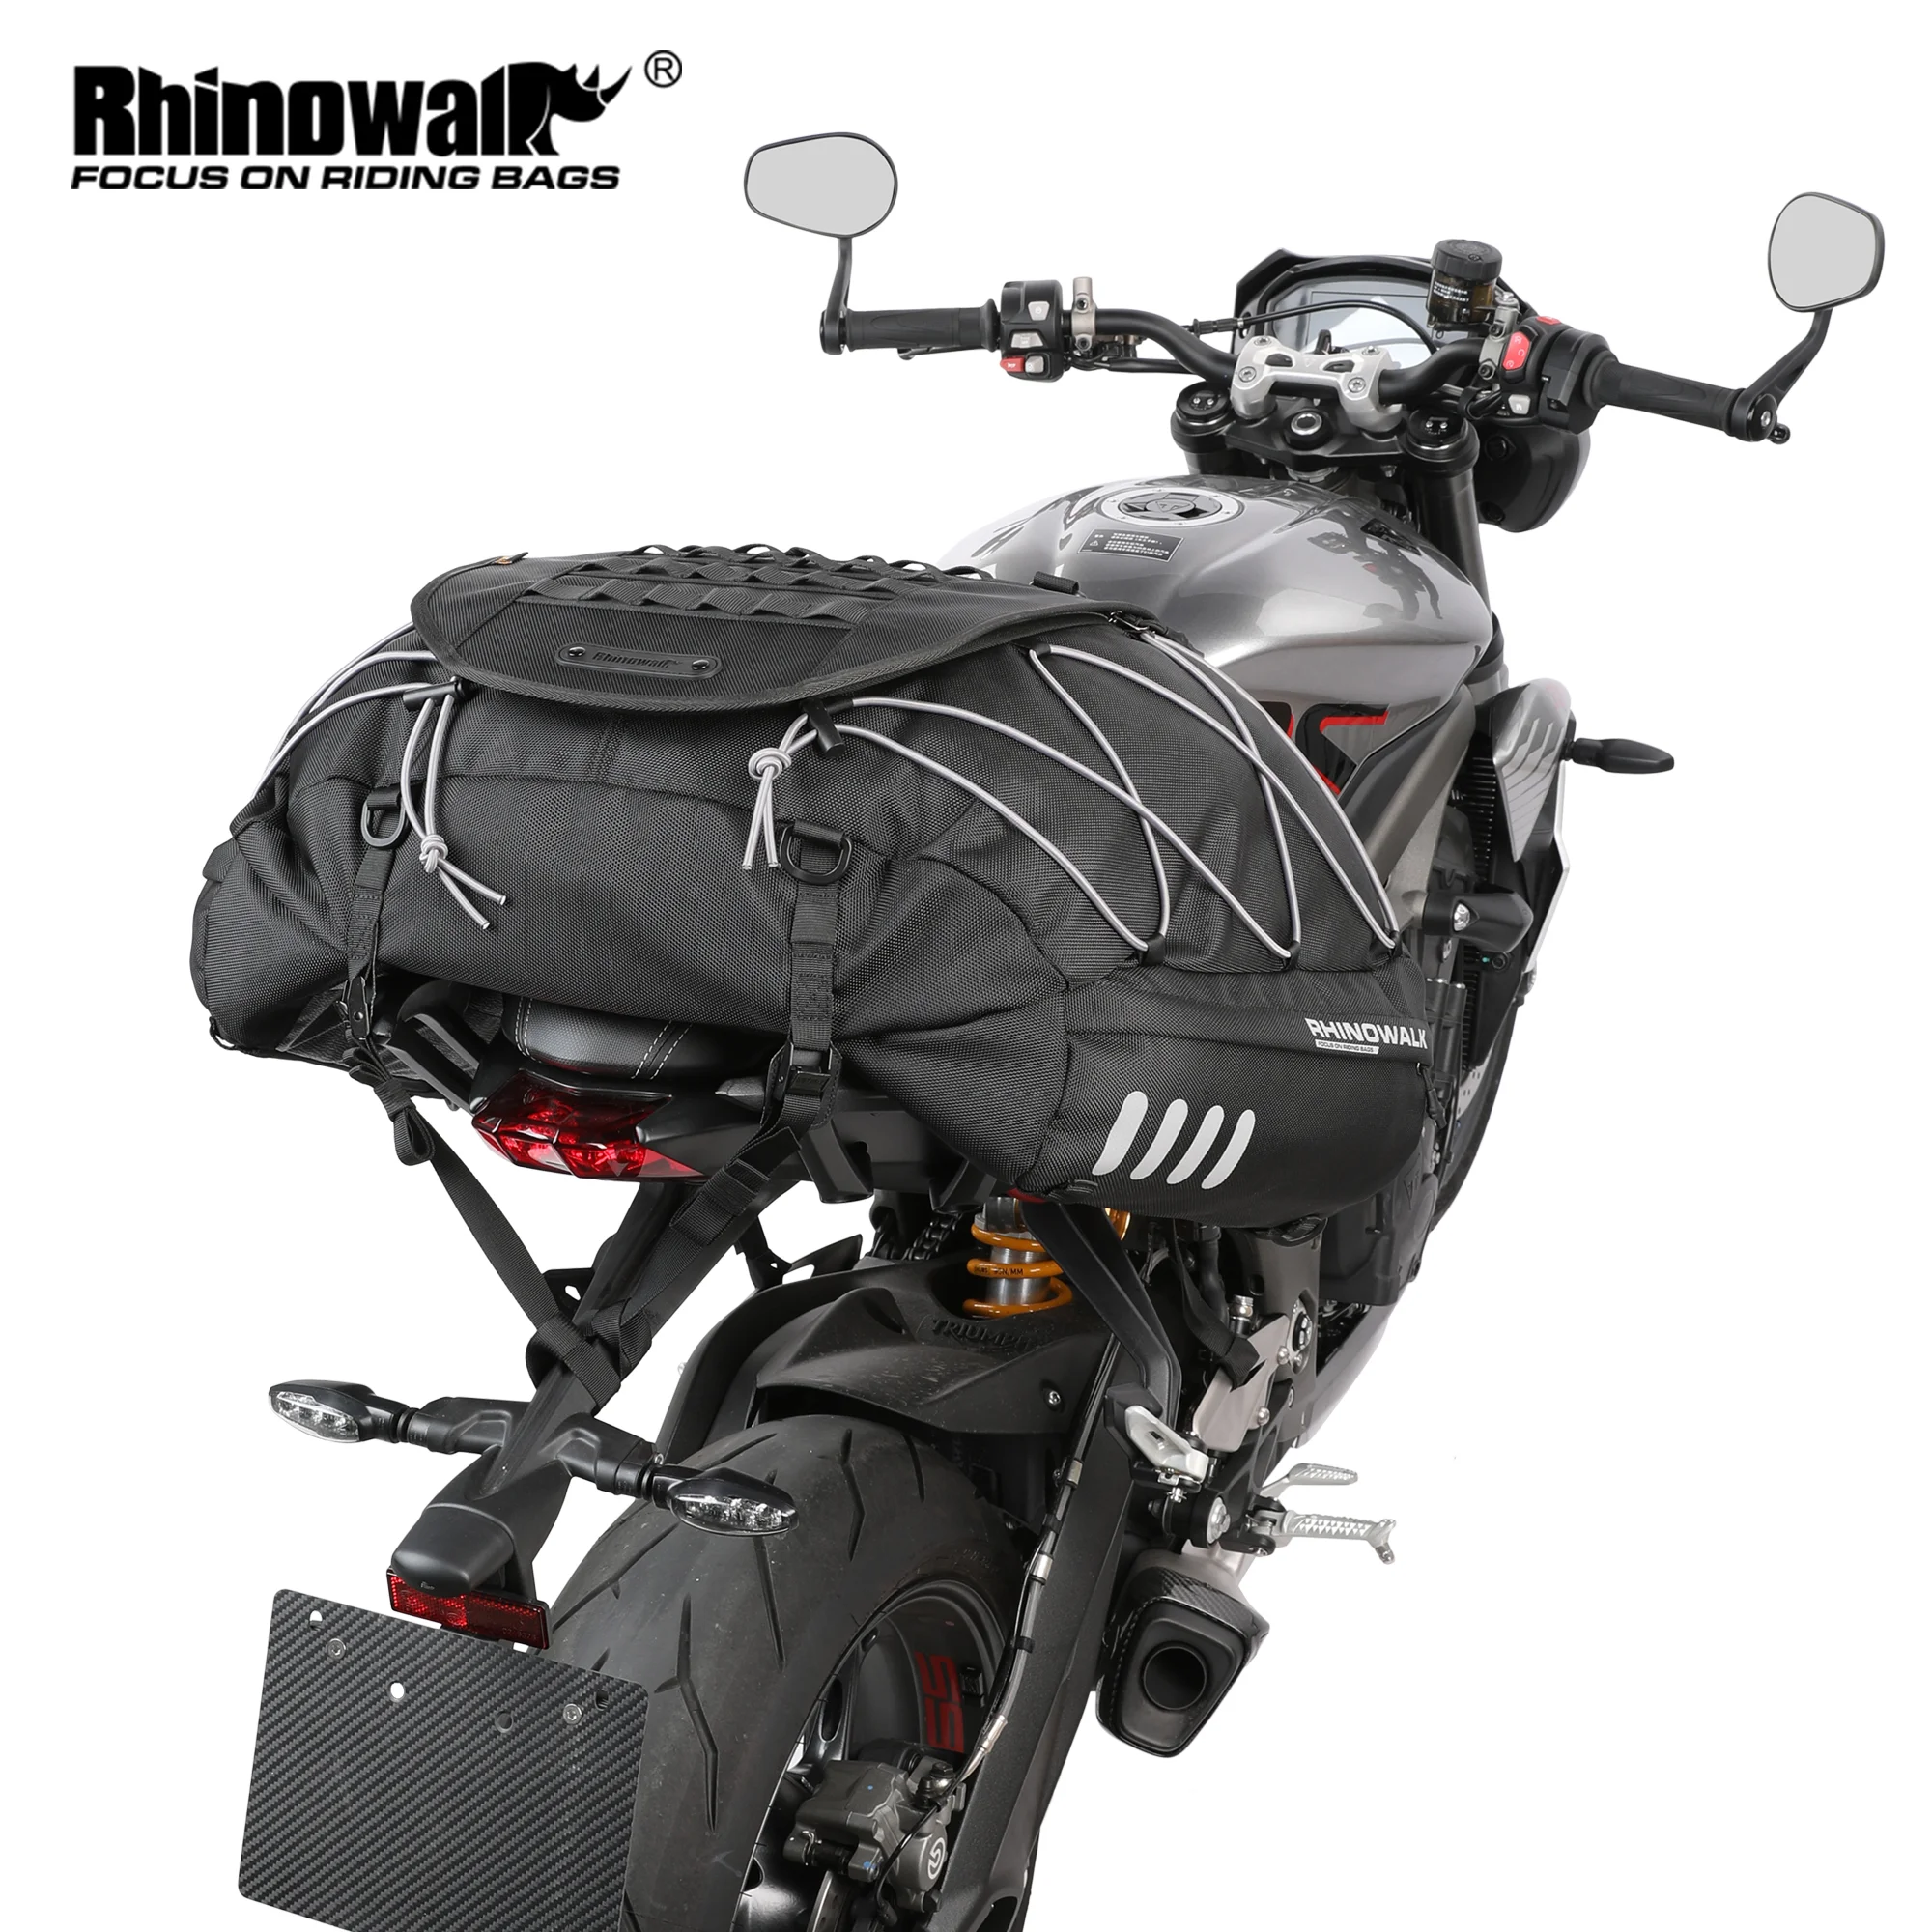 Rhinowalk Motorcycle Expandable Cargobag tail bag,Motorcycle Travel Luggage  50L bag,All Waterproof All Weather/Trunk/Rack Bag/Luggage Tail Bag-Black